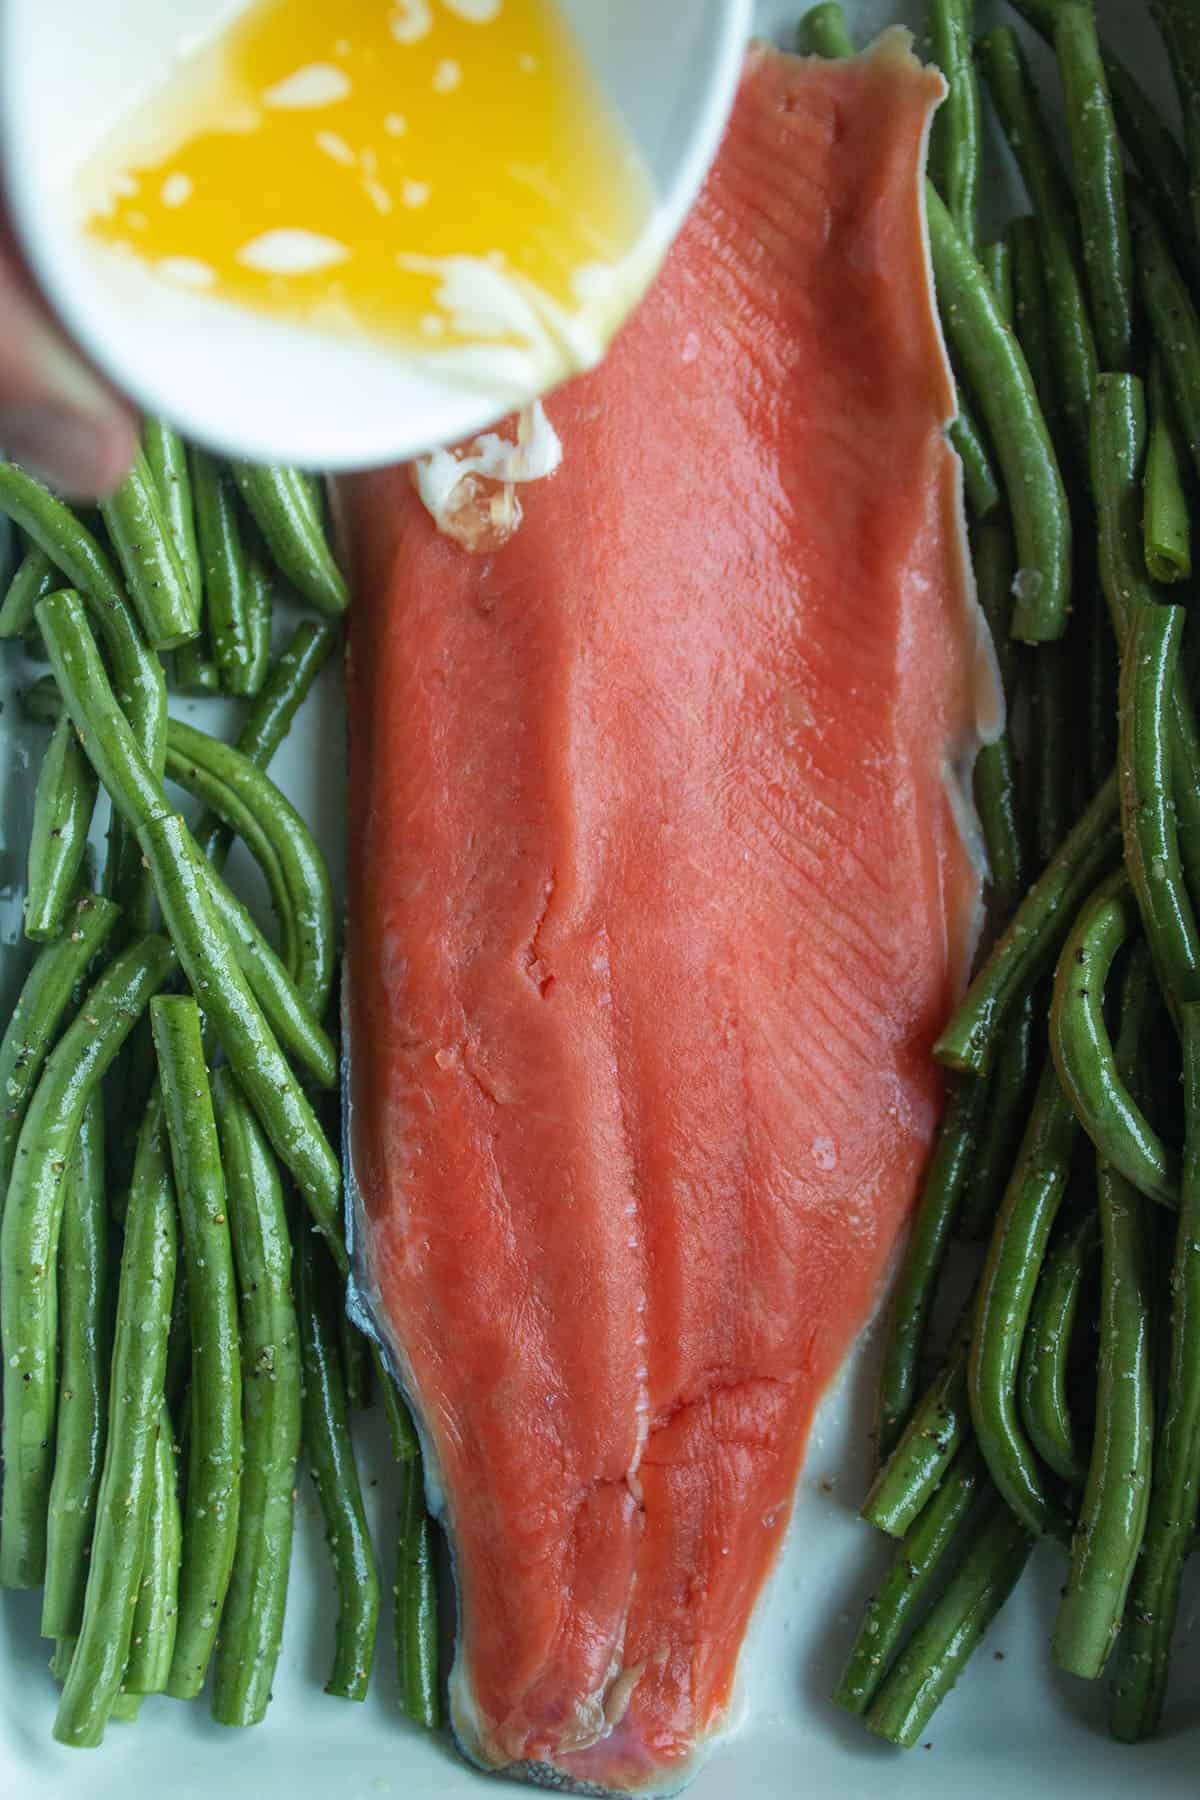 Salmon fillet with green beans and butter being drizzled on top.